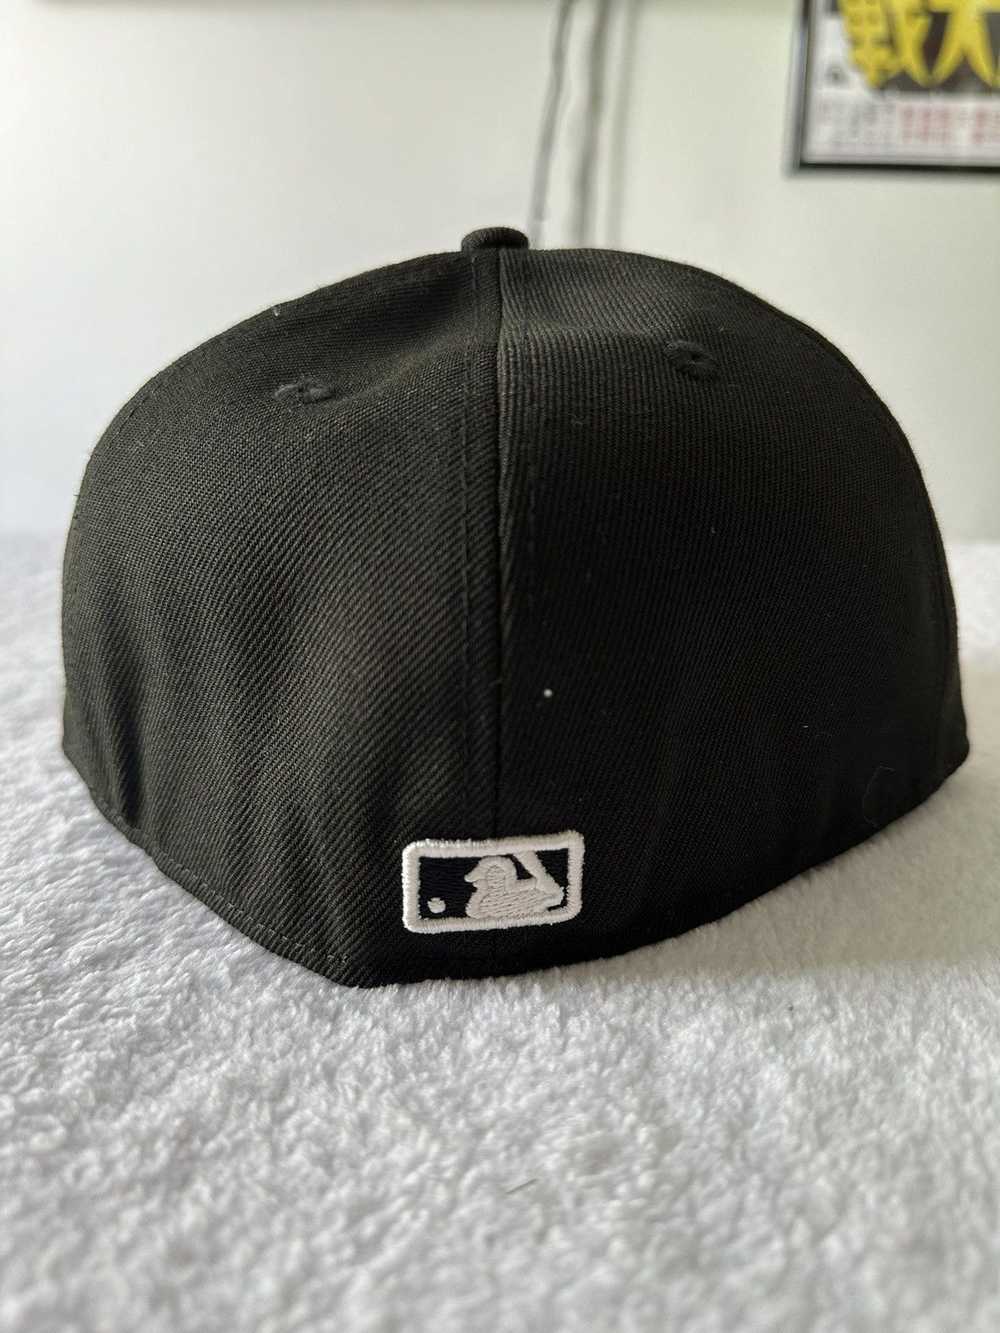 New Era Chicago White Sox Fitted Hat (7 1/4) - image 3